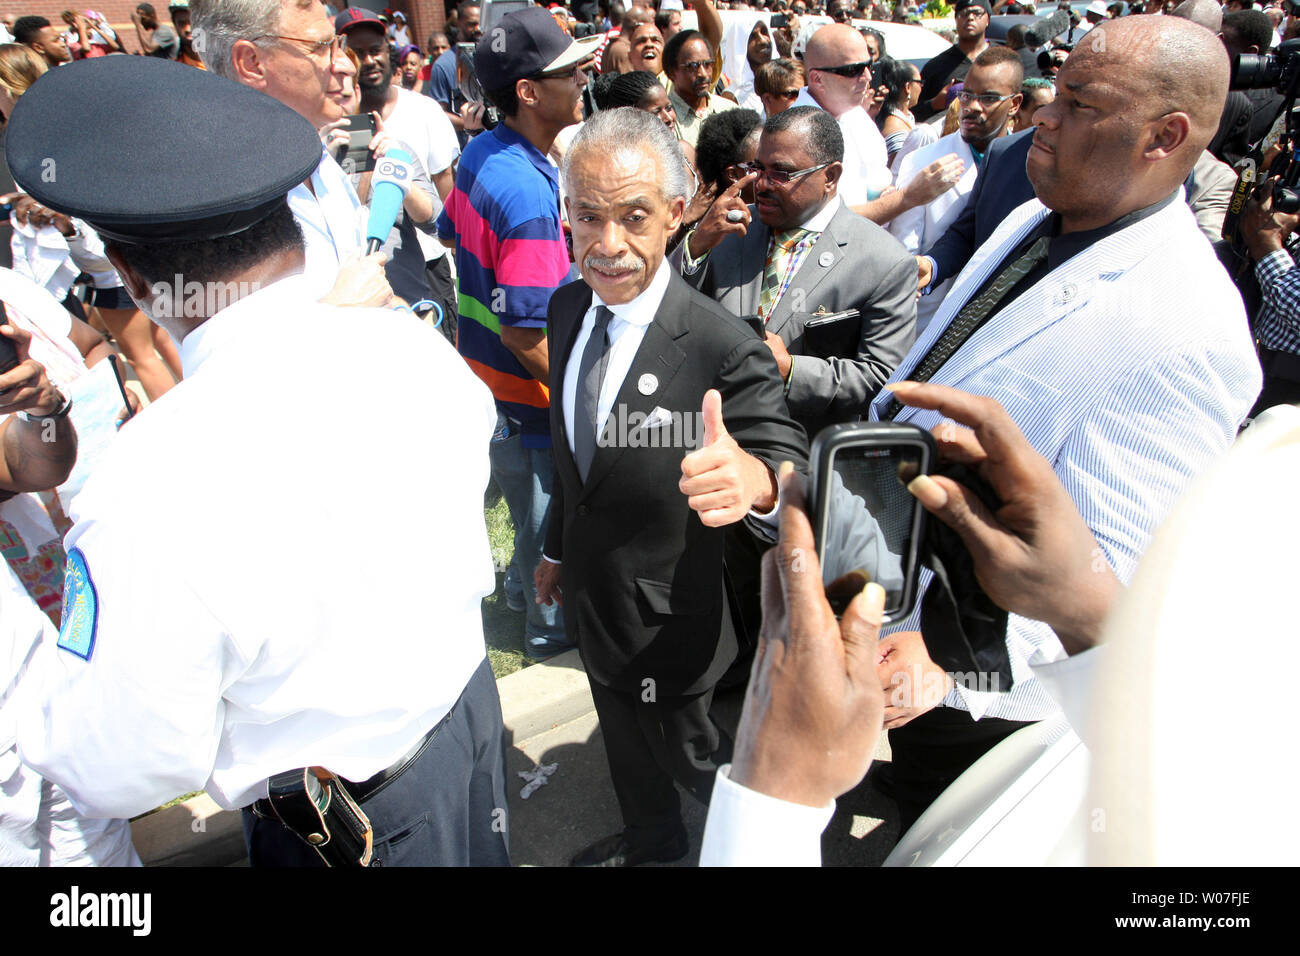 Rev. Al Sharpton gives a thumbs up as he leaves the Friendly Temple Missionary Baptist Church at the completion of the funeral for Michael Brown Jr. in St. Louis on August 25, 2014. Brown gained attention after was shot by a white Ferguson, Missouri police officer on August 9 and was unarmed. The shooting led to several nights of looting, arrests and heavy police presence.   UPI/Bill Greenblatt Stock Photo